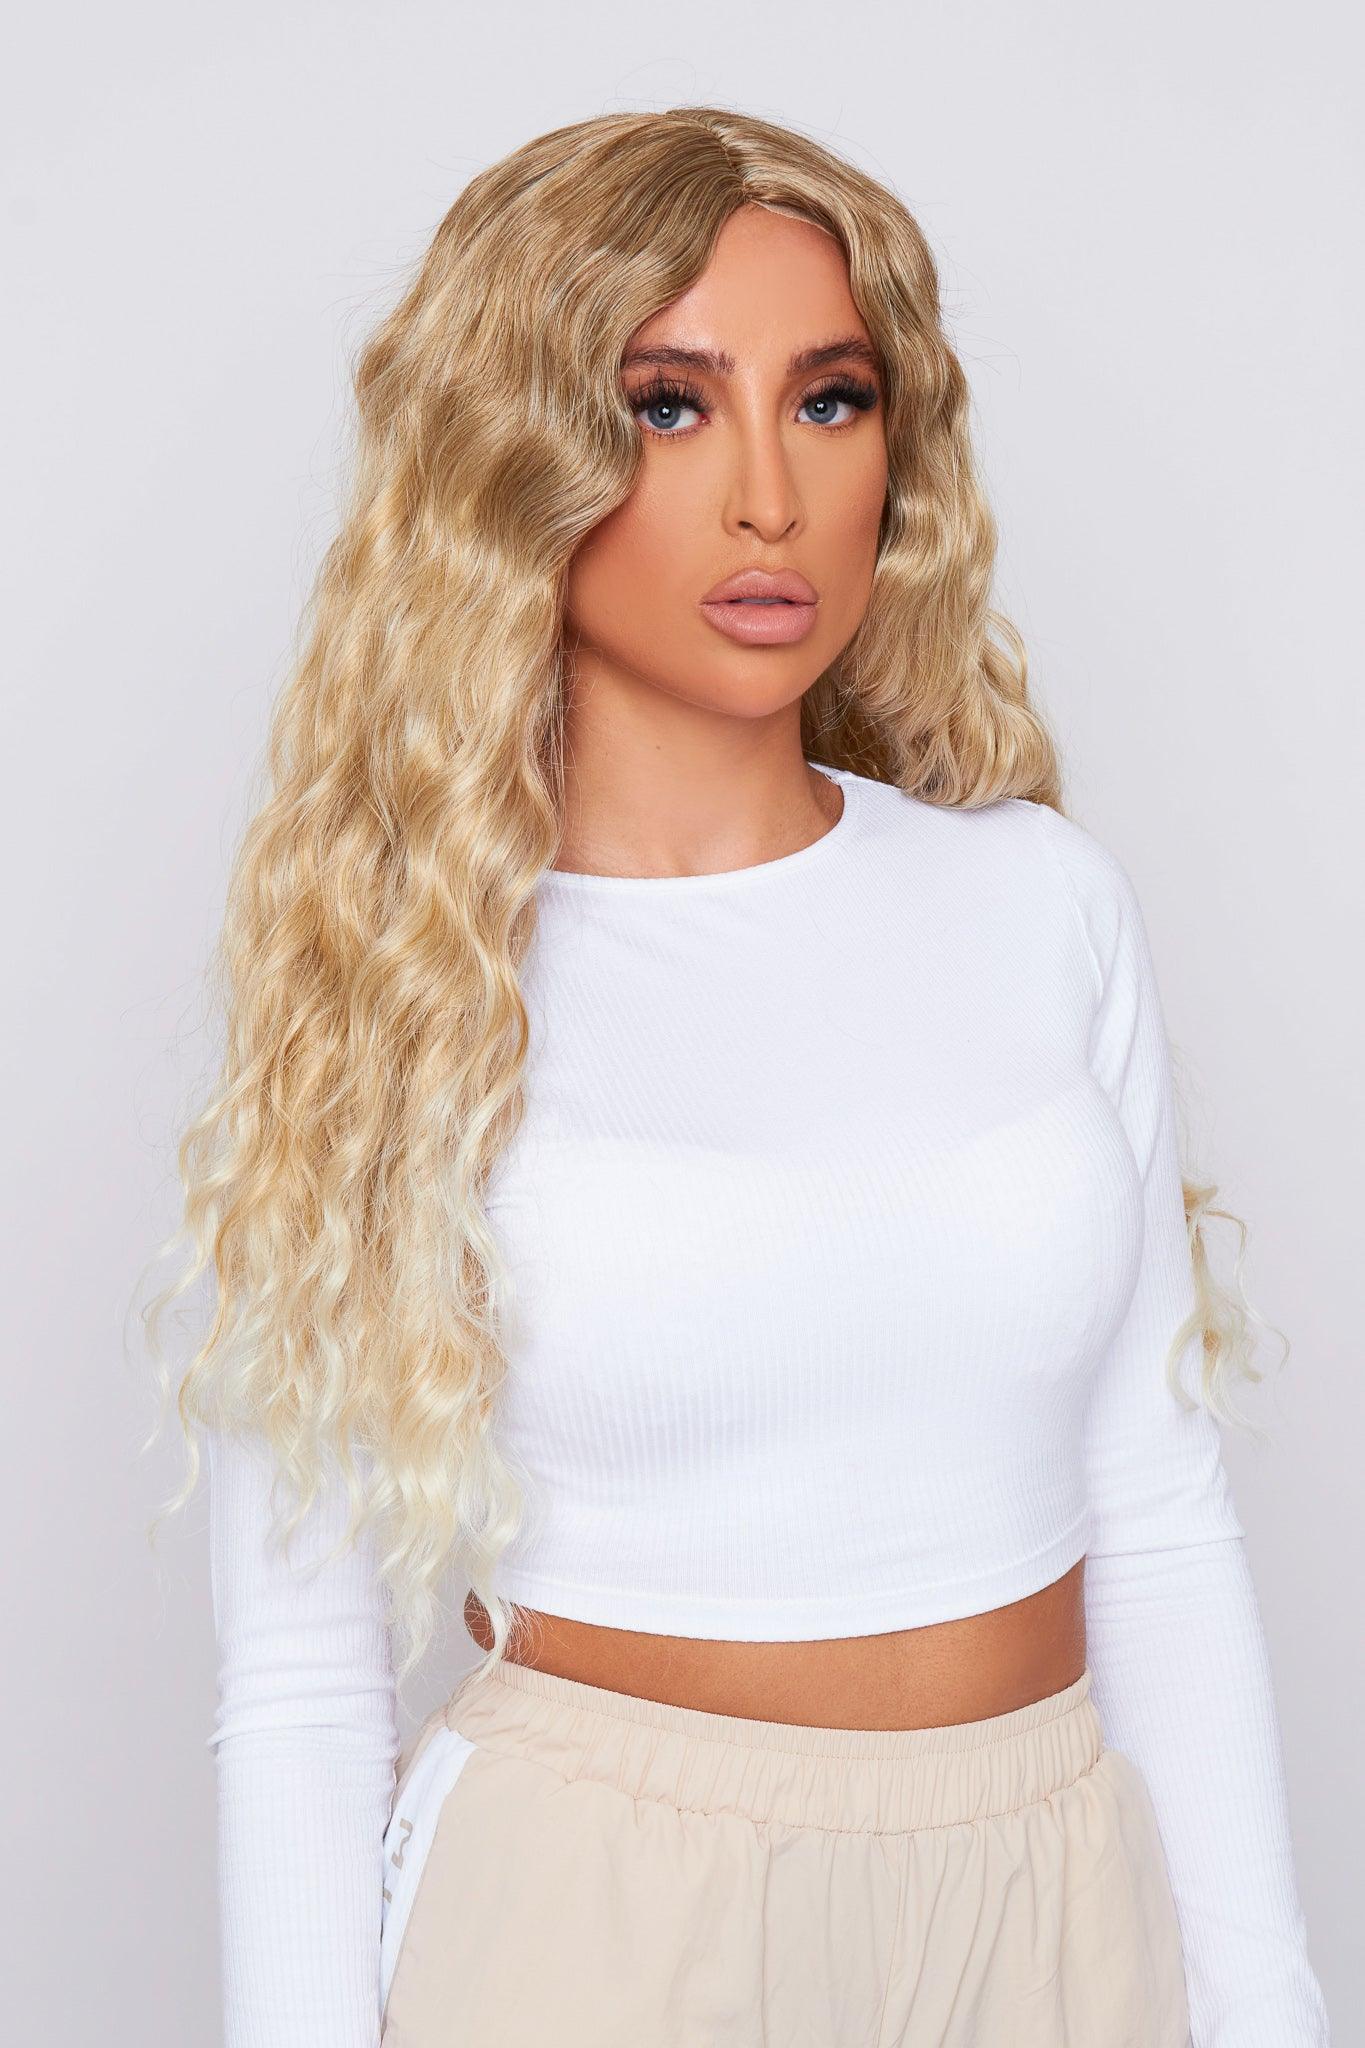 Blonde curly wig being worn by a beautiful model from pbeautyhair